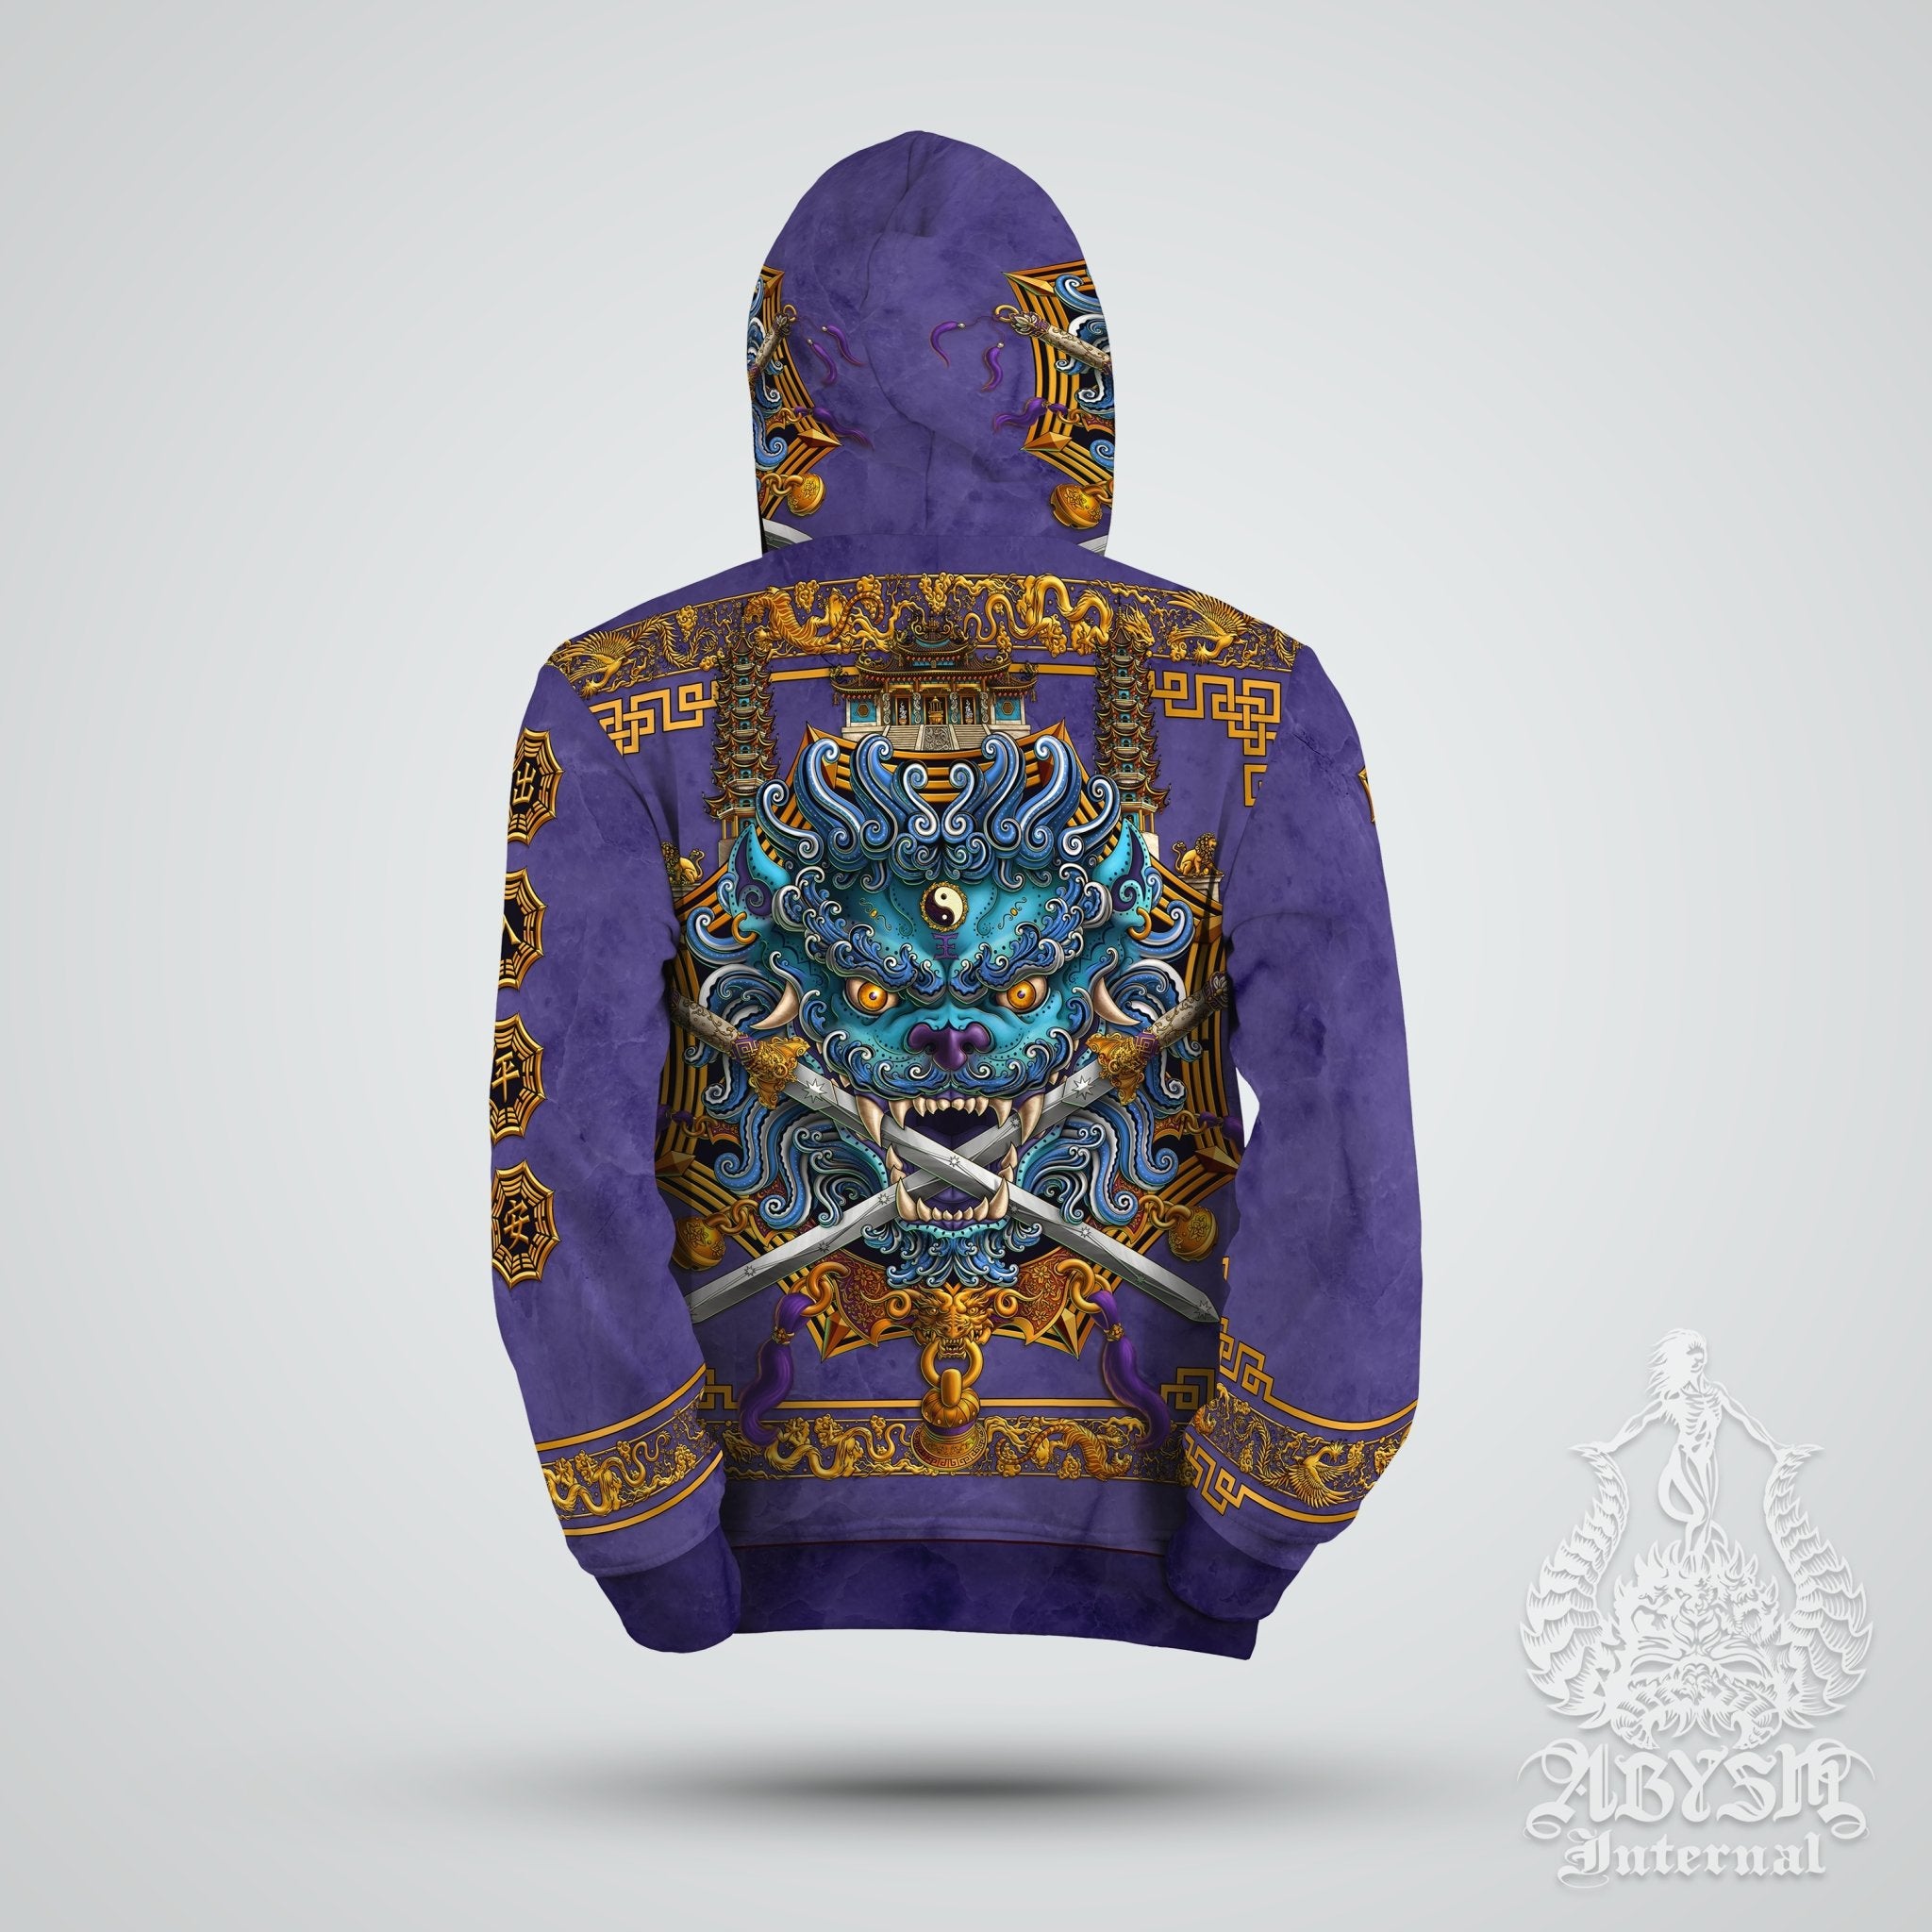 Lion Hoodie, Street Outfit, Chinese Streetwear, Taiwan Sword Lion, Asian Art Apparel, Alternative Clothing, Unisex - Blue and Purple - Abysm Internal